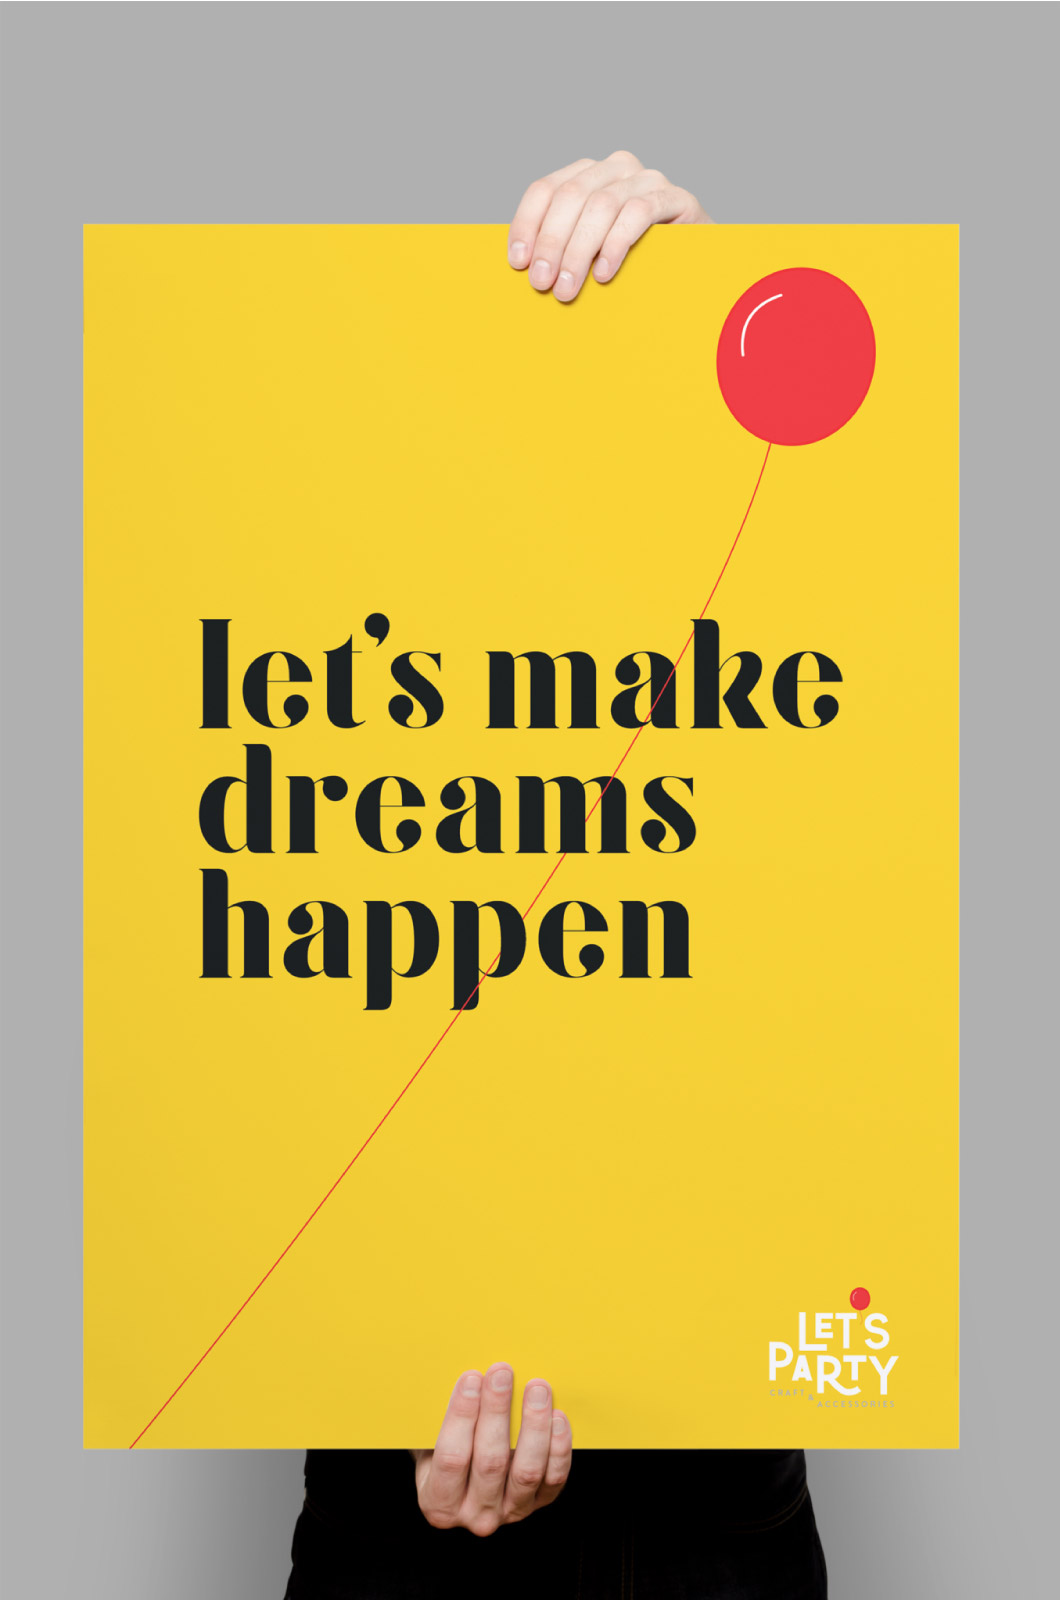 let's party poster - strongweb! creative group - graphic design studio